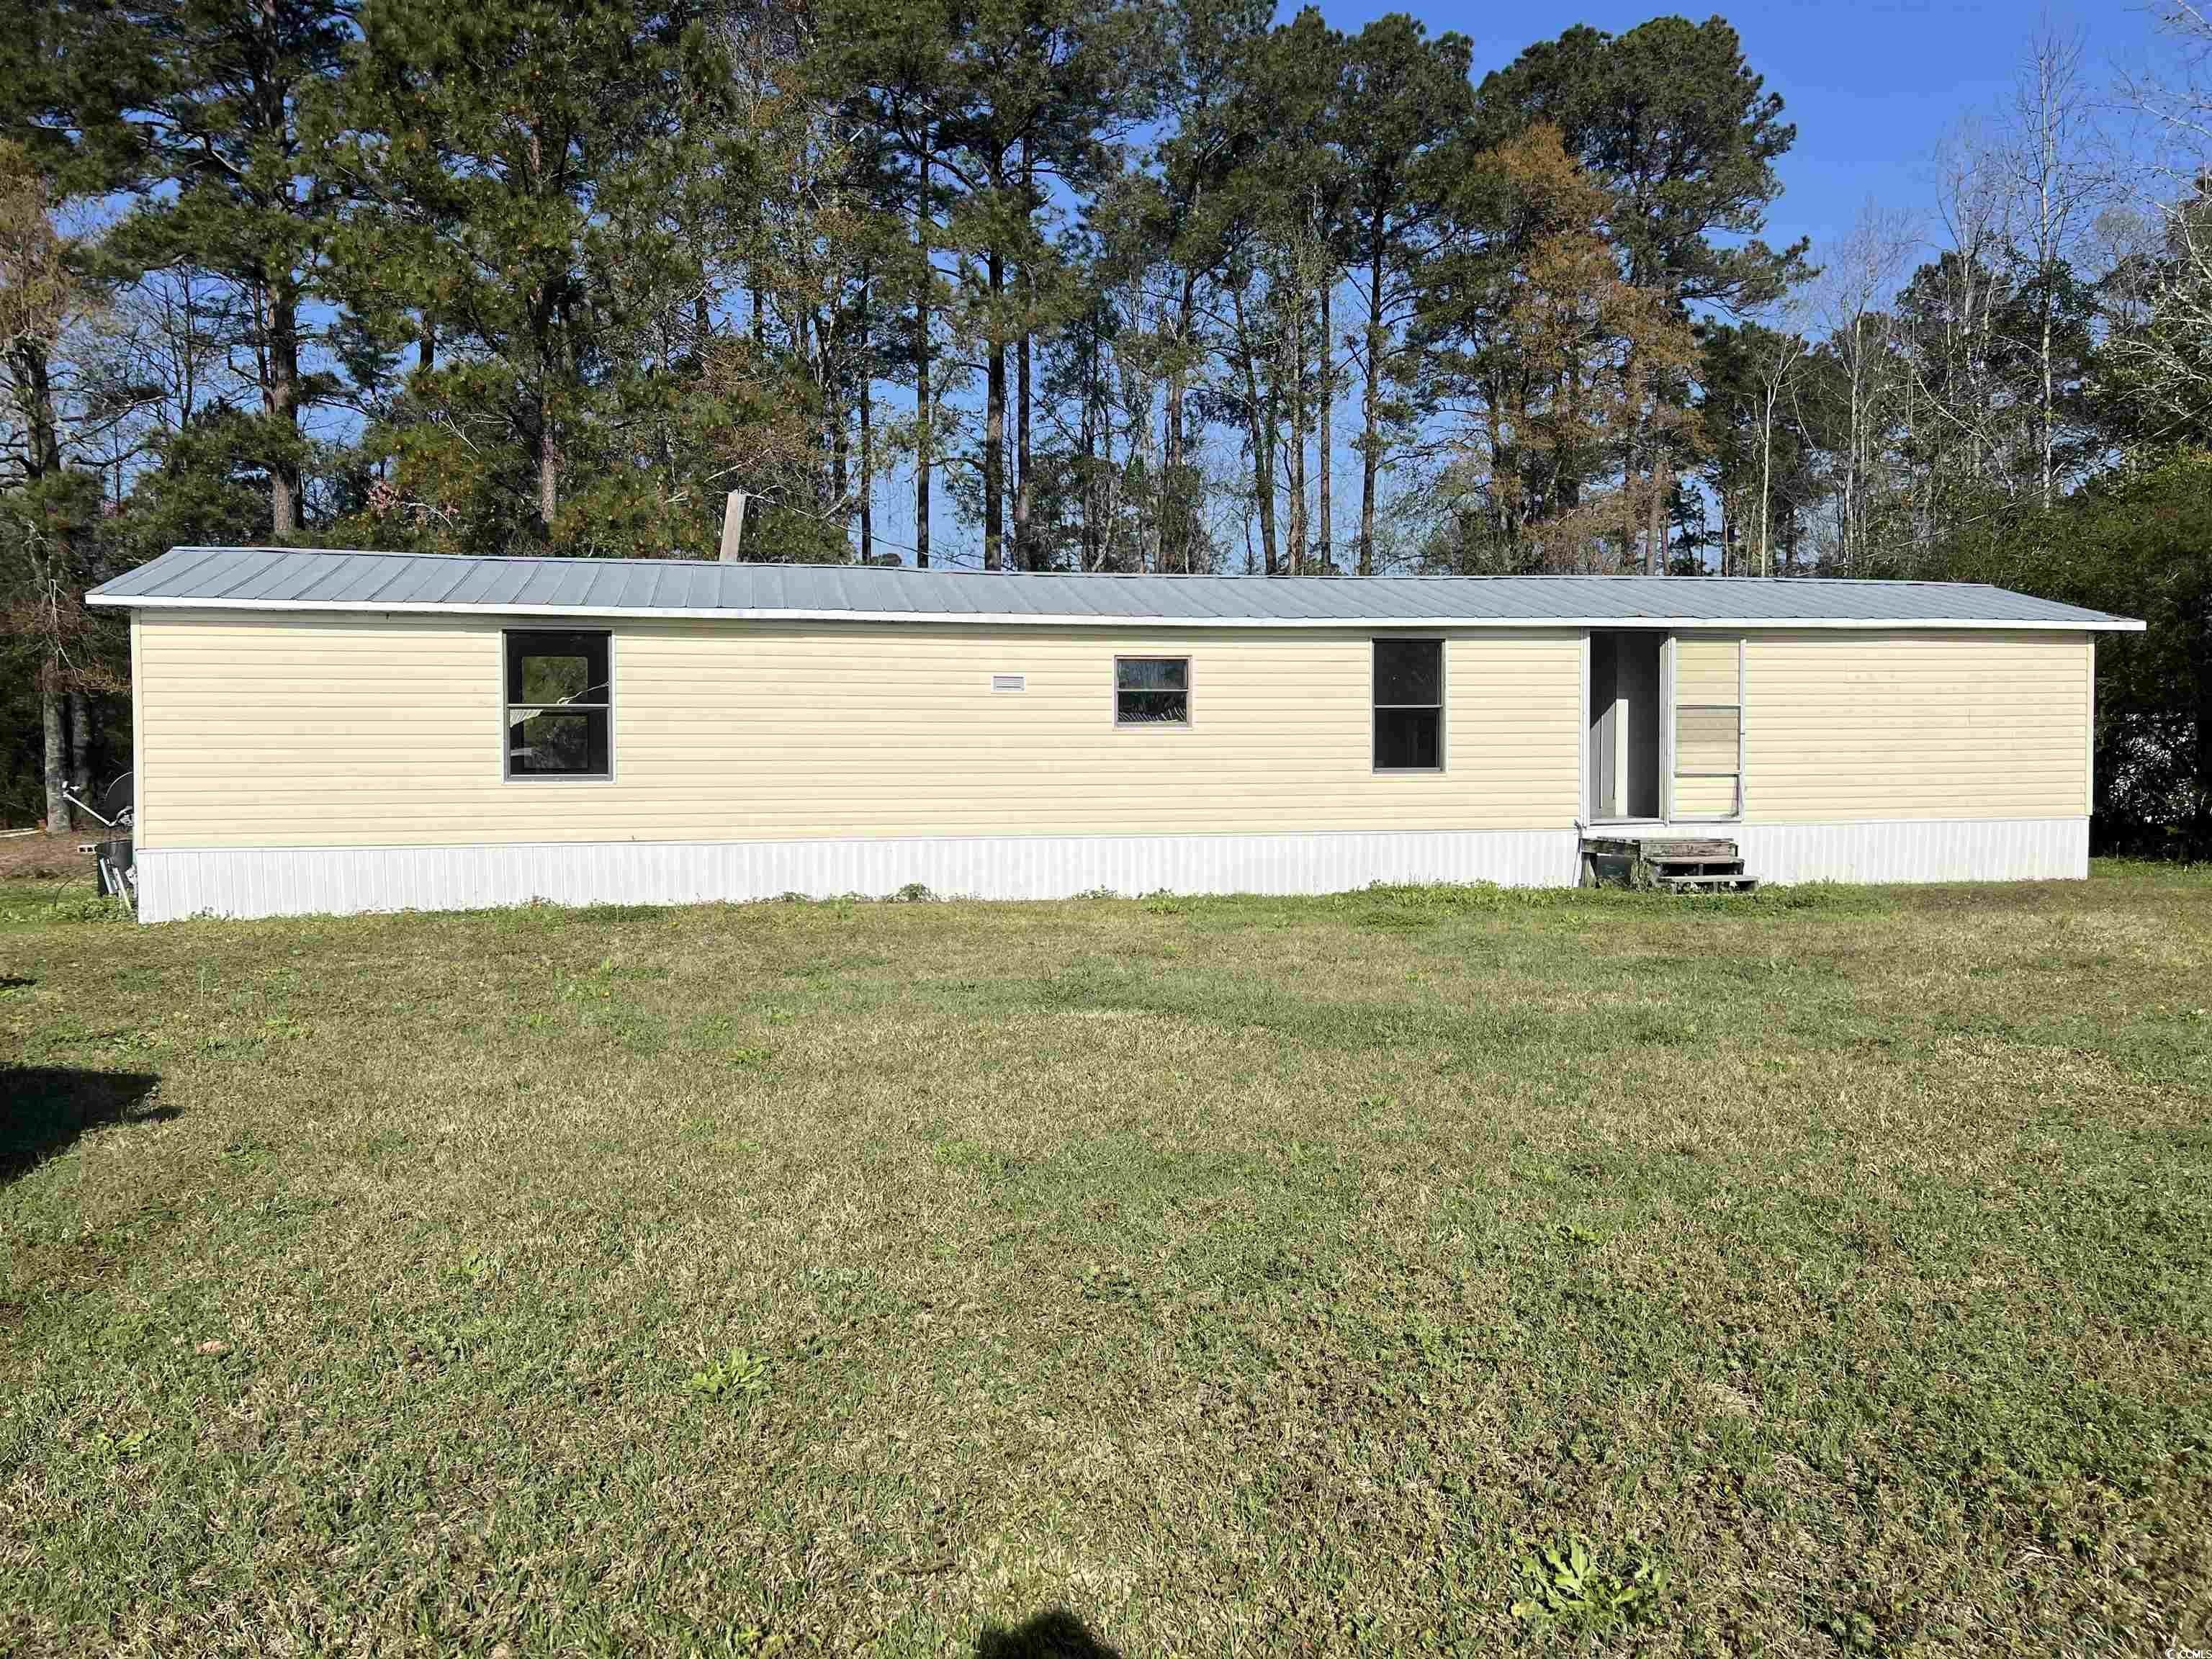 charming 2 bedroom, 2 bathroom mobile home in conway,sc with 0.83 acres available! renovator's dream - needs a new kitchen. don't miss this opportunity to customize your ideal living space